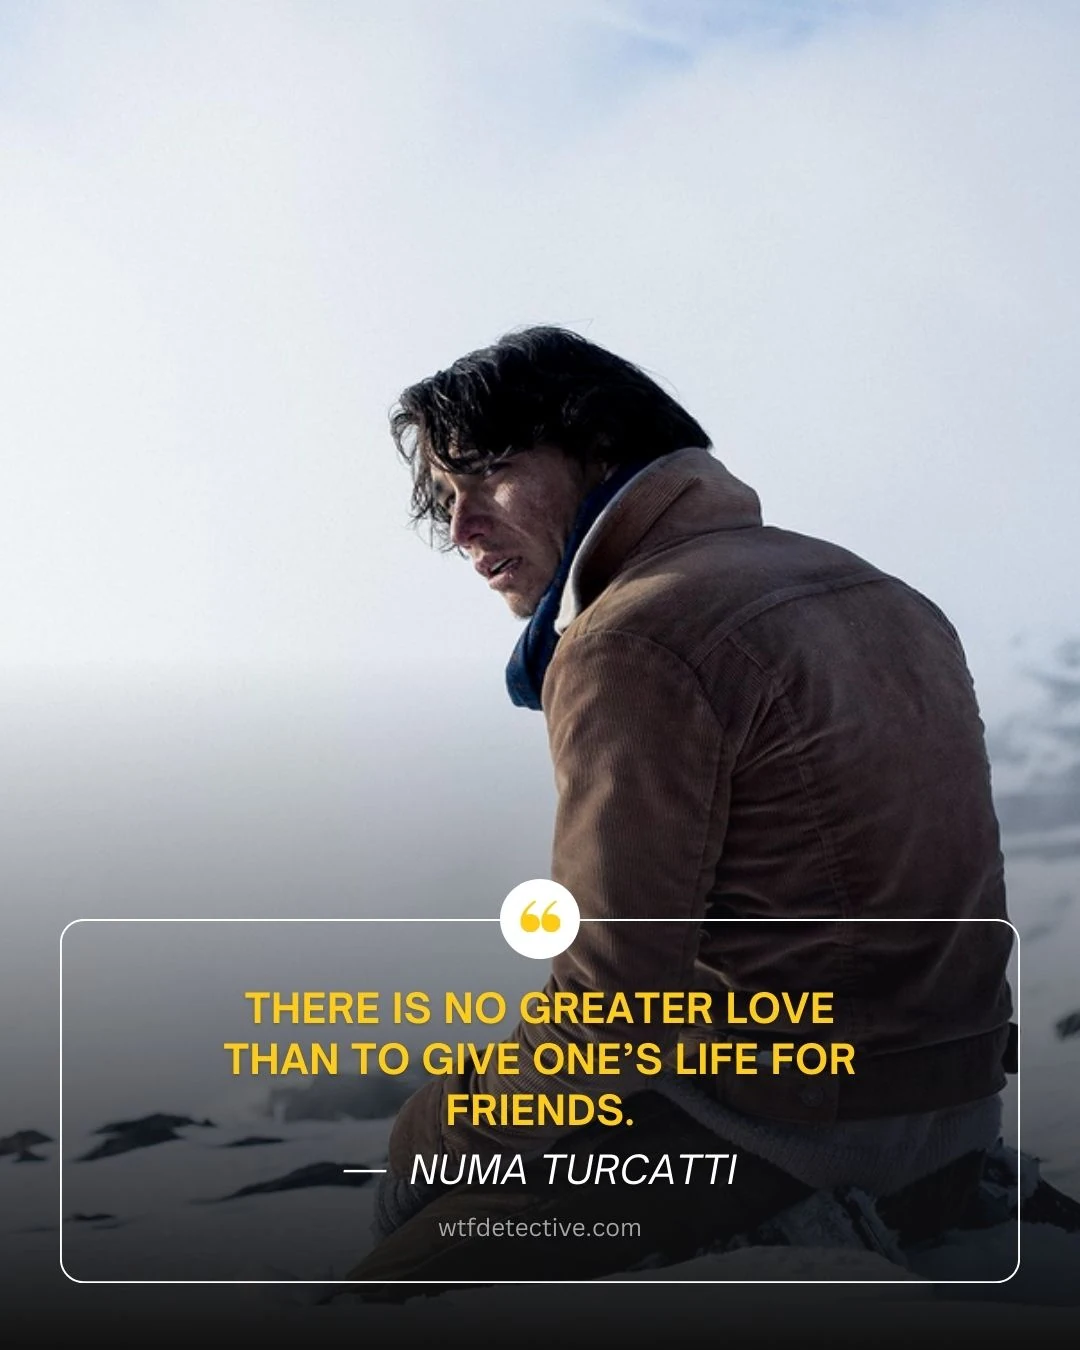 There is no greater love than to give one’s life for friends.

numa turcatti quote from society of the snow 2023